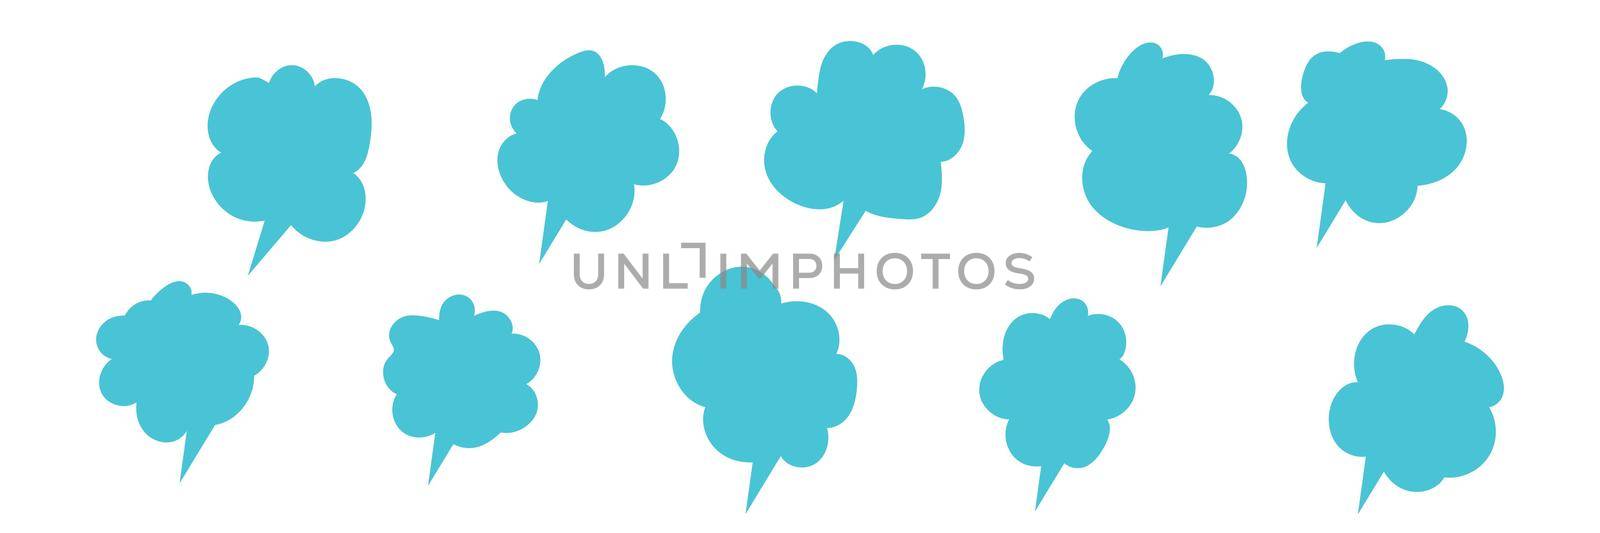 Set of color speech bubbles. Cartoon Vector illustration. Isolated on transparent white background. Hand draw style, dialog clouds.